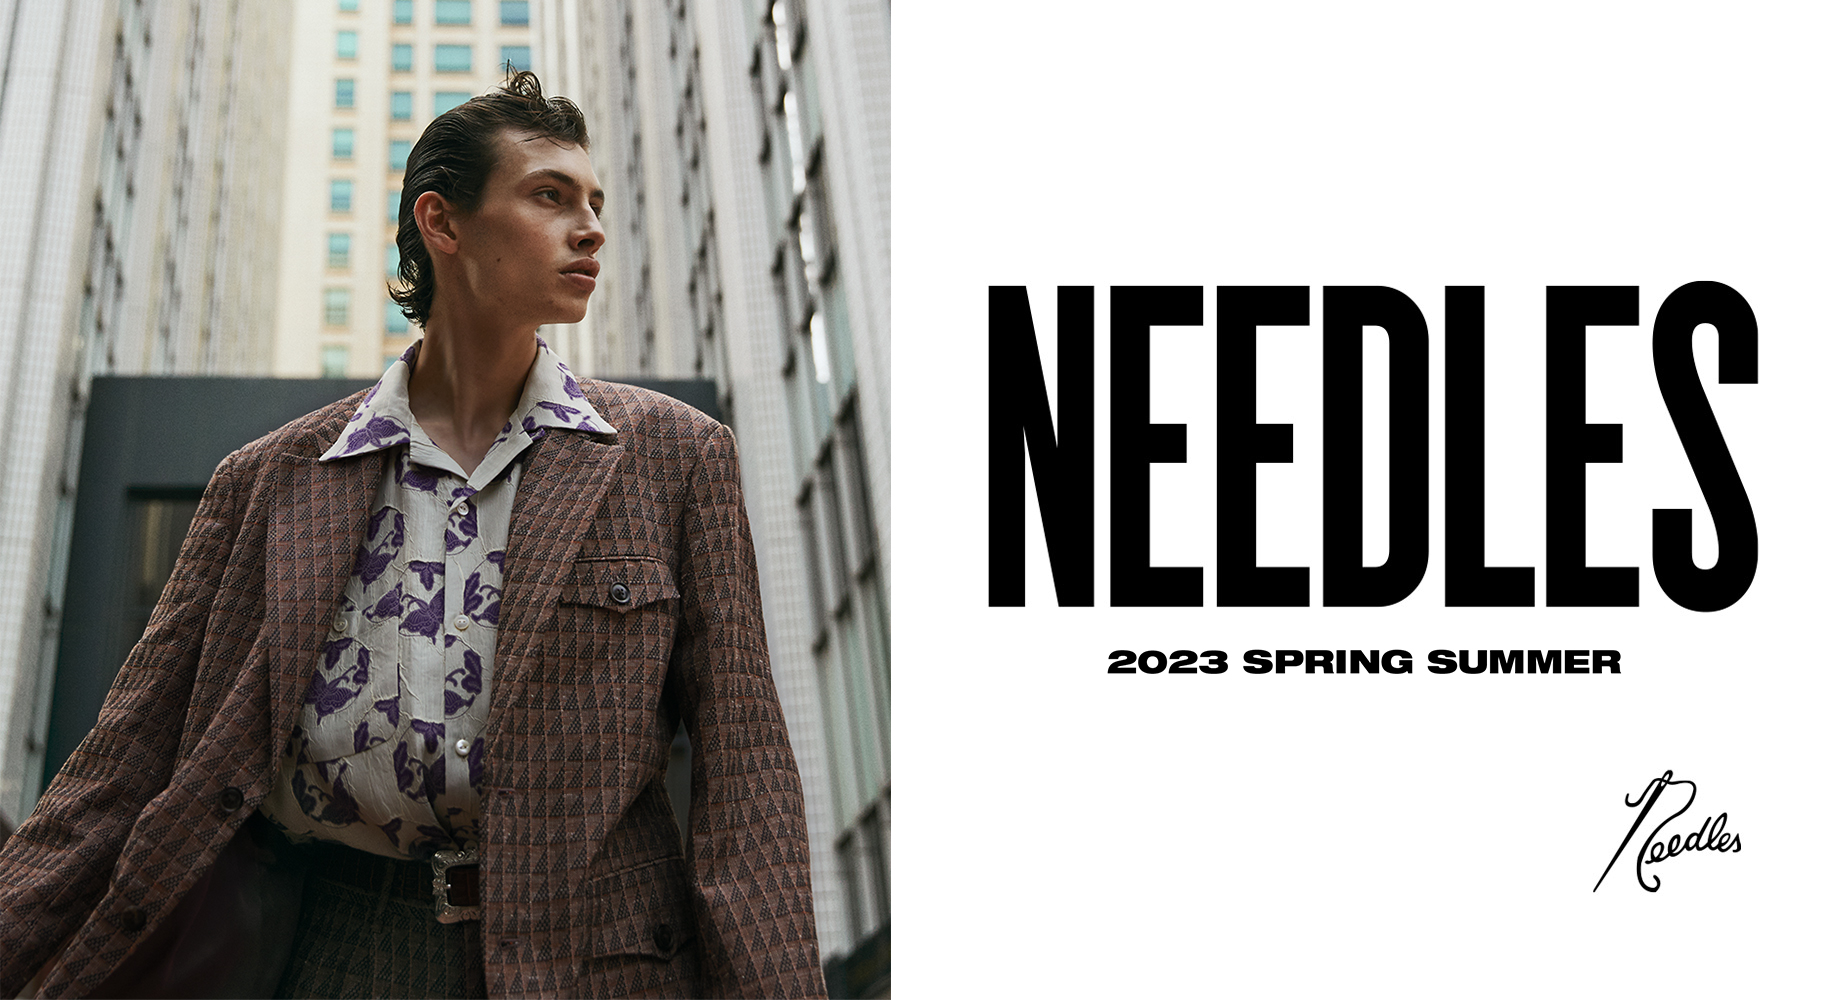 〈NEEDLES〉2023 SPRING SUMMER COLLECTION